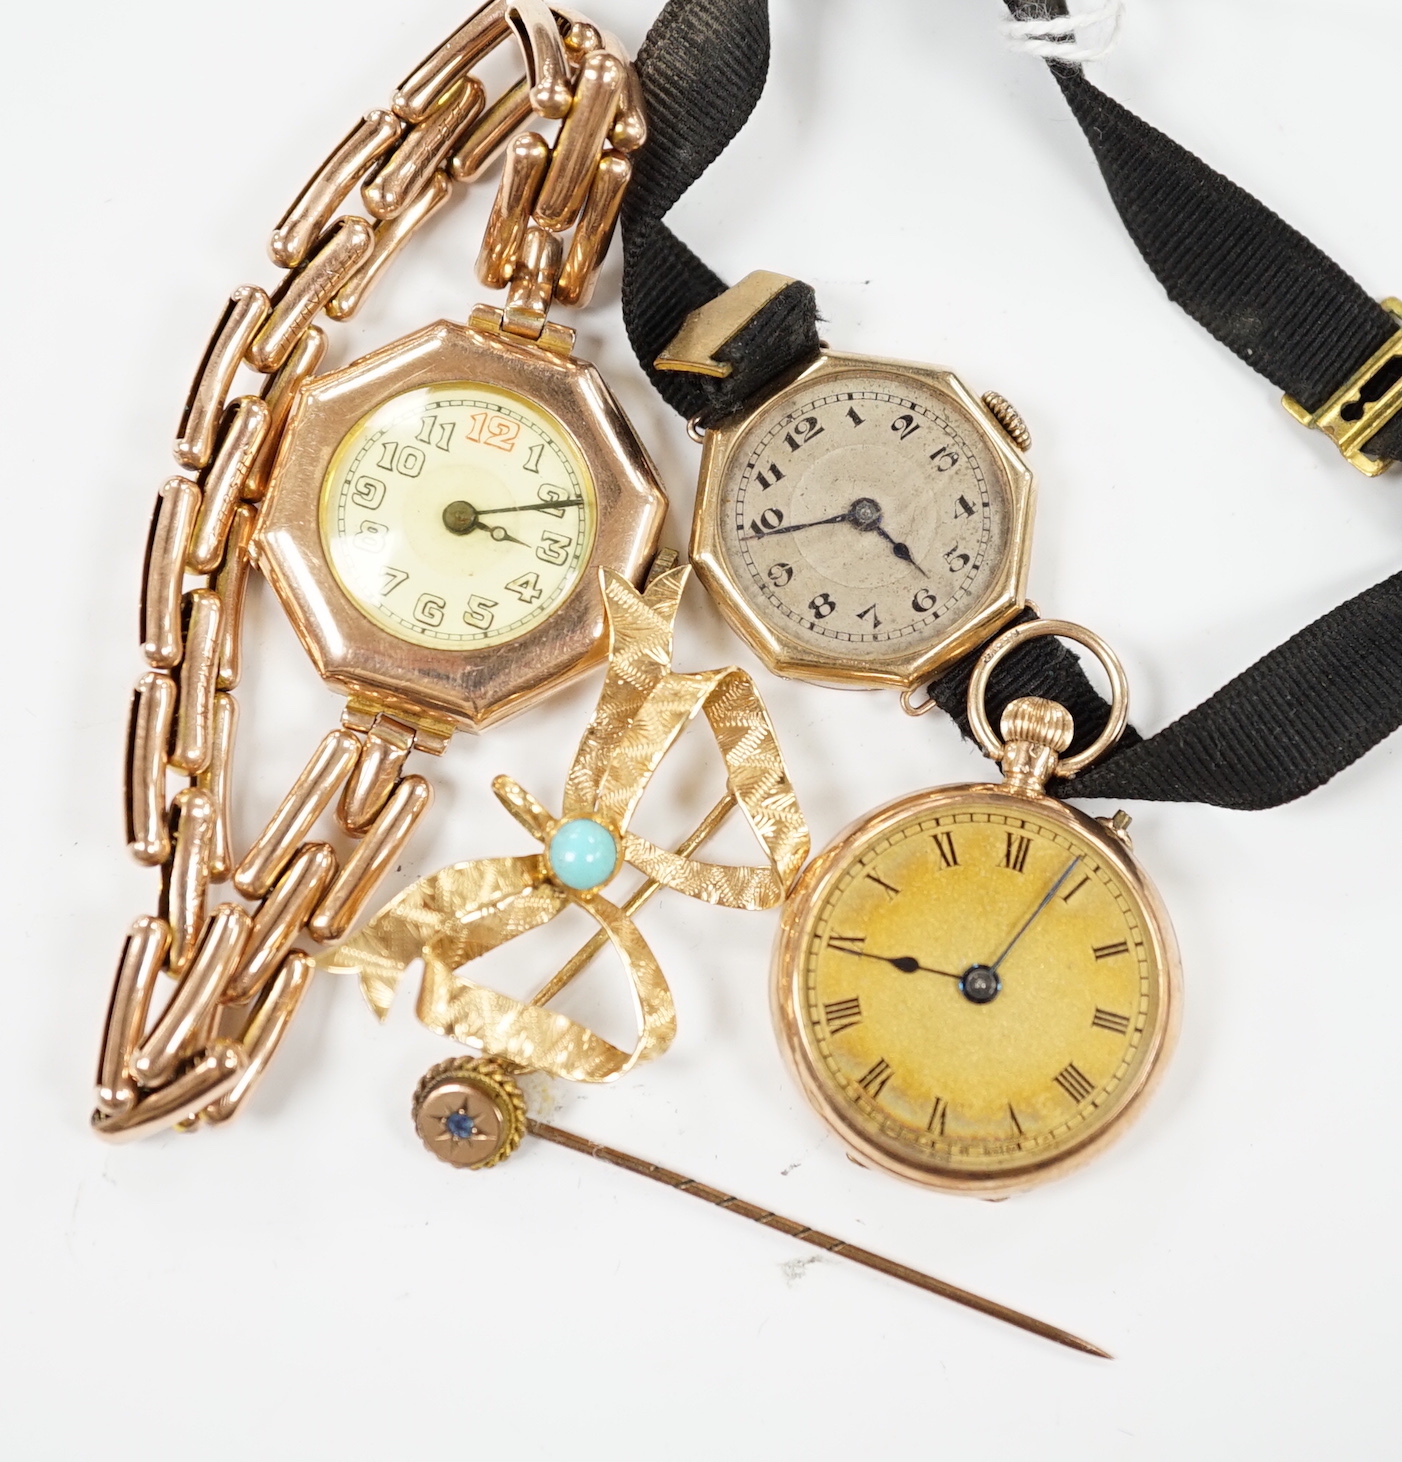 Two early 20th century 9ct gold manual wind wrist watches, one on an expanding 9ct bracelet, a 9ct gold fob watch, a 750 and turquoise set 'butterfly' shaped ribbon bow brooch and a stick pin.